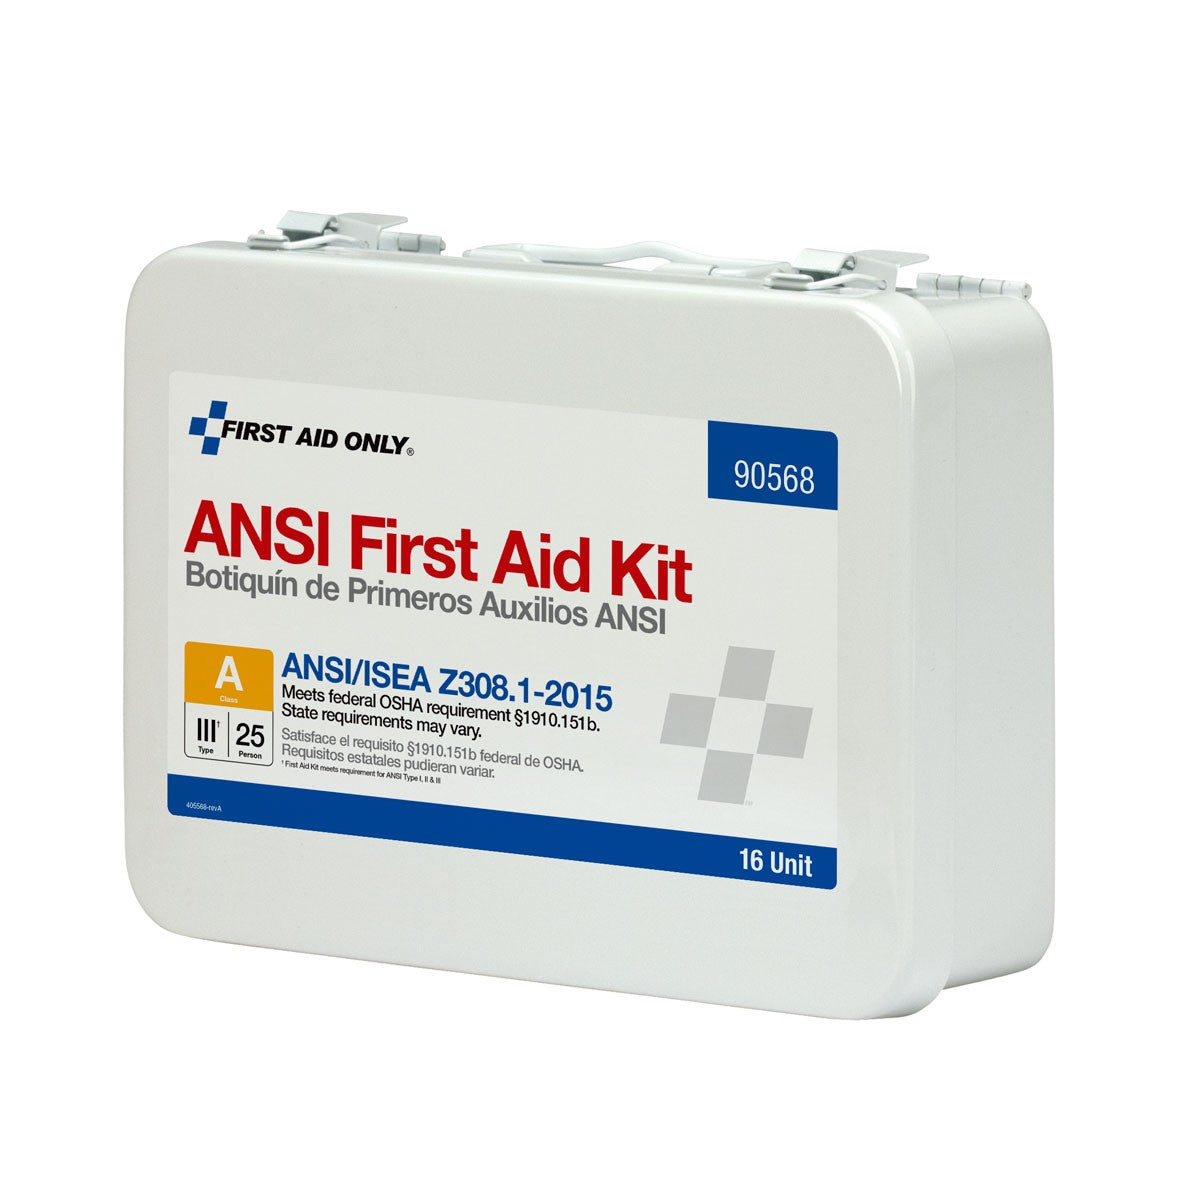 25 Person Unitized Metal First Aid Kit, ANSI Compliant - W-90568